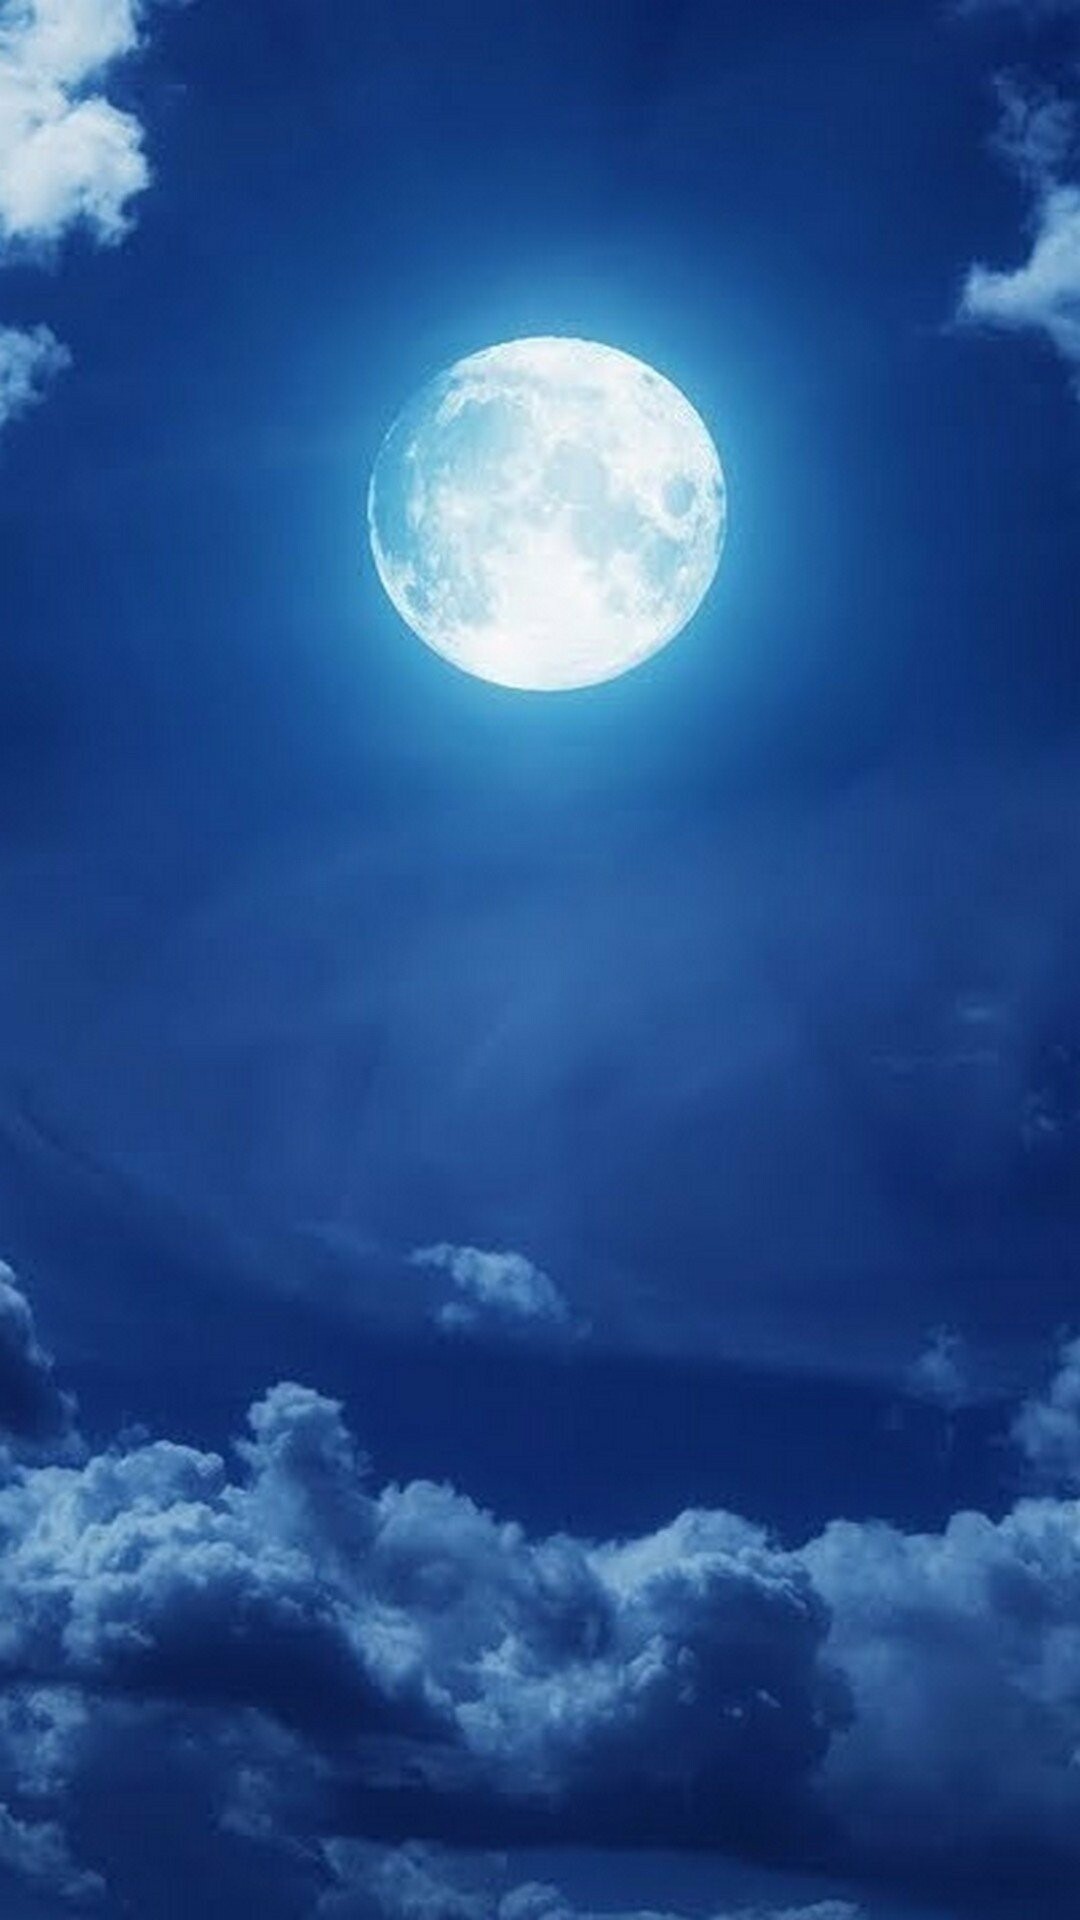 Moonlight: The Moon, Earth's only permanent natural satellite. 1080x1920 Full HD Wallpaper.